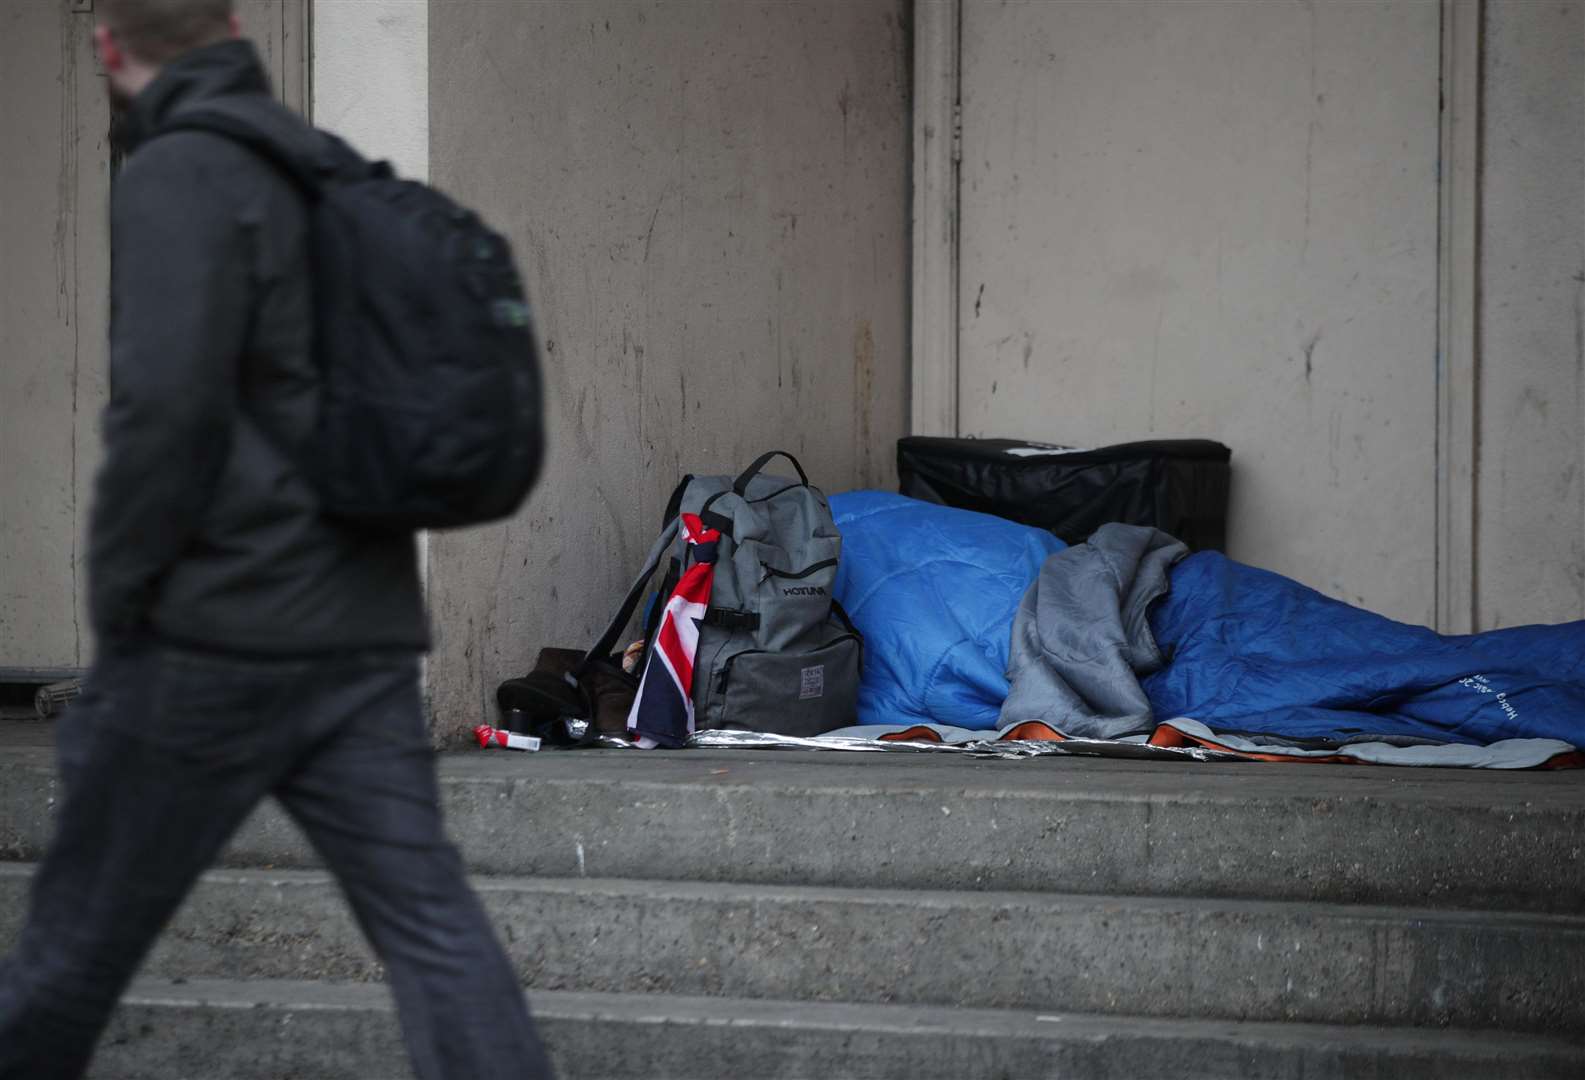 Maidstone currently has 48 people sleeping rough on its streets